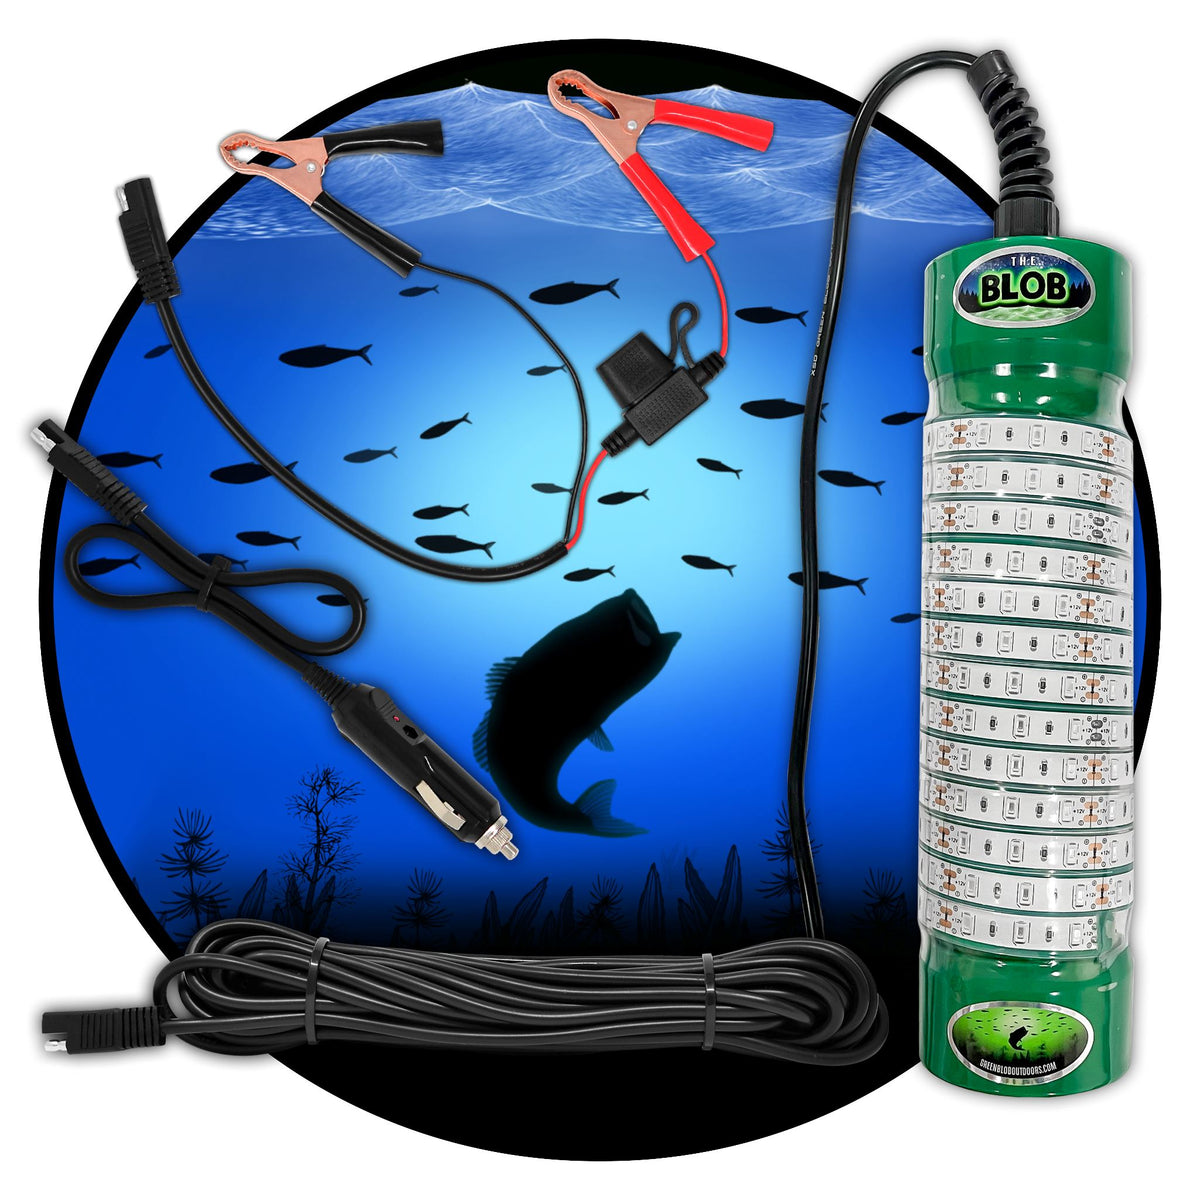 Green Blob Outdoors Underwater Fishing Light 7500 Lumen for Boats includes Alligator Clips &amp; Cigarette Lighter w/ 30ft Cord, Fishing Lights Green Blob Outdoors 